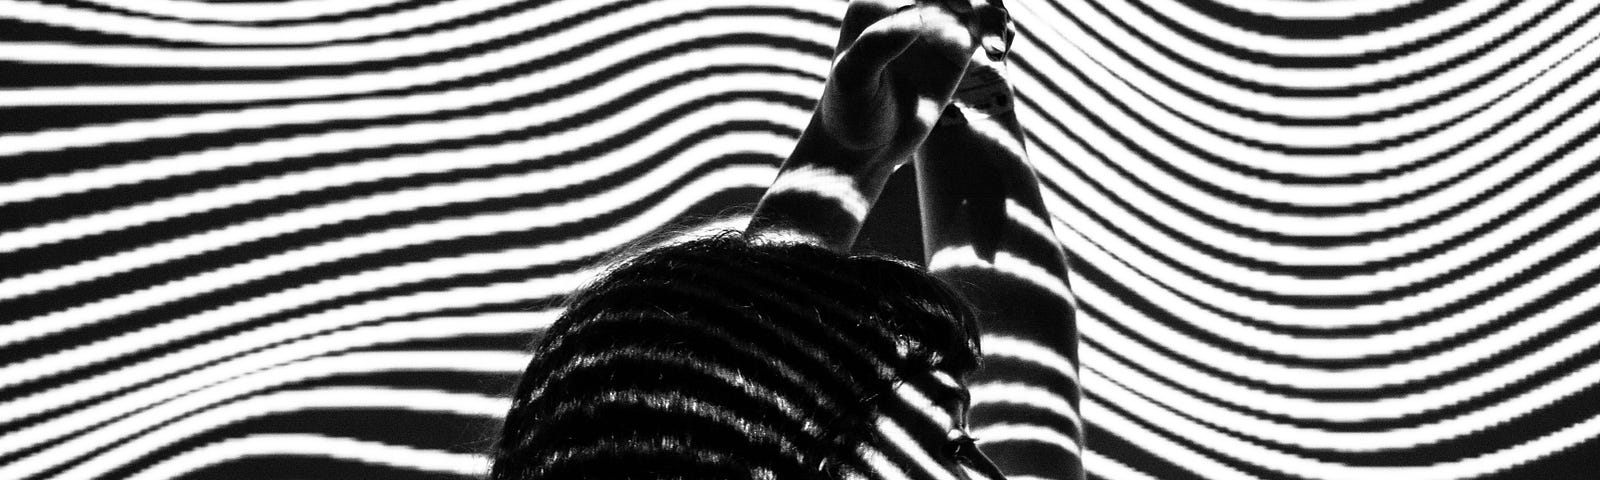 Woman lays face down, arms outstretched overhead. An overlay of black and white stripes, like a fingerprint, lays on top of her.